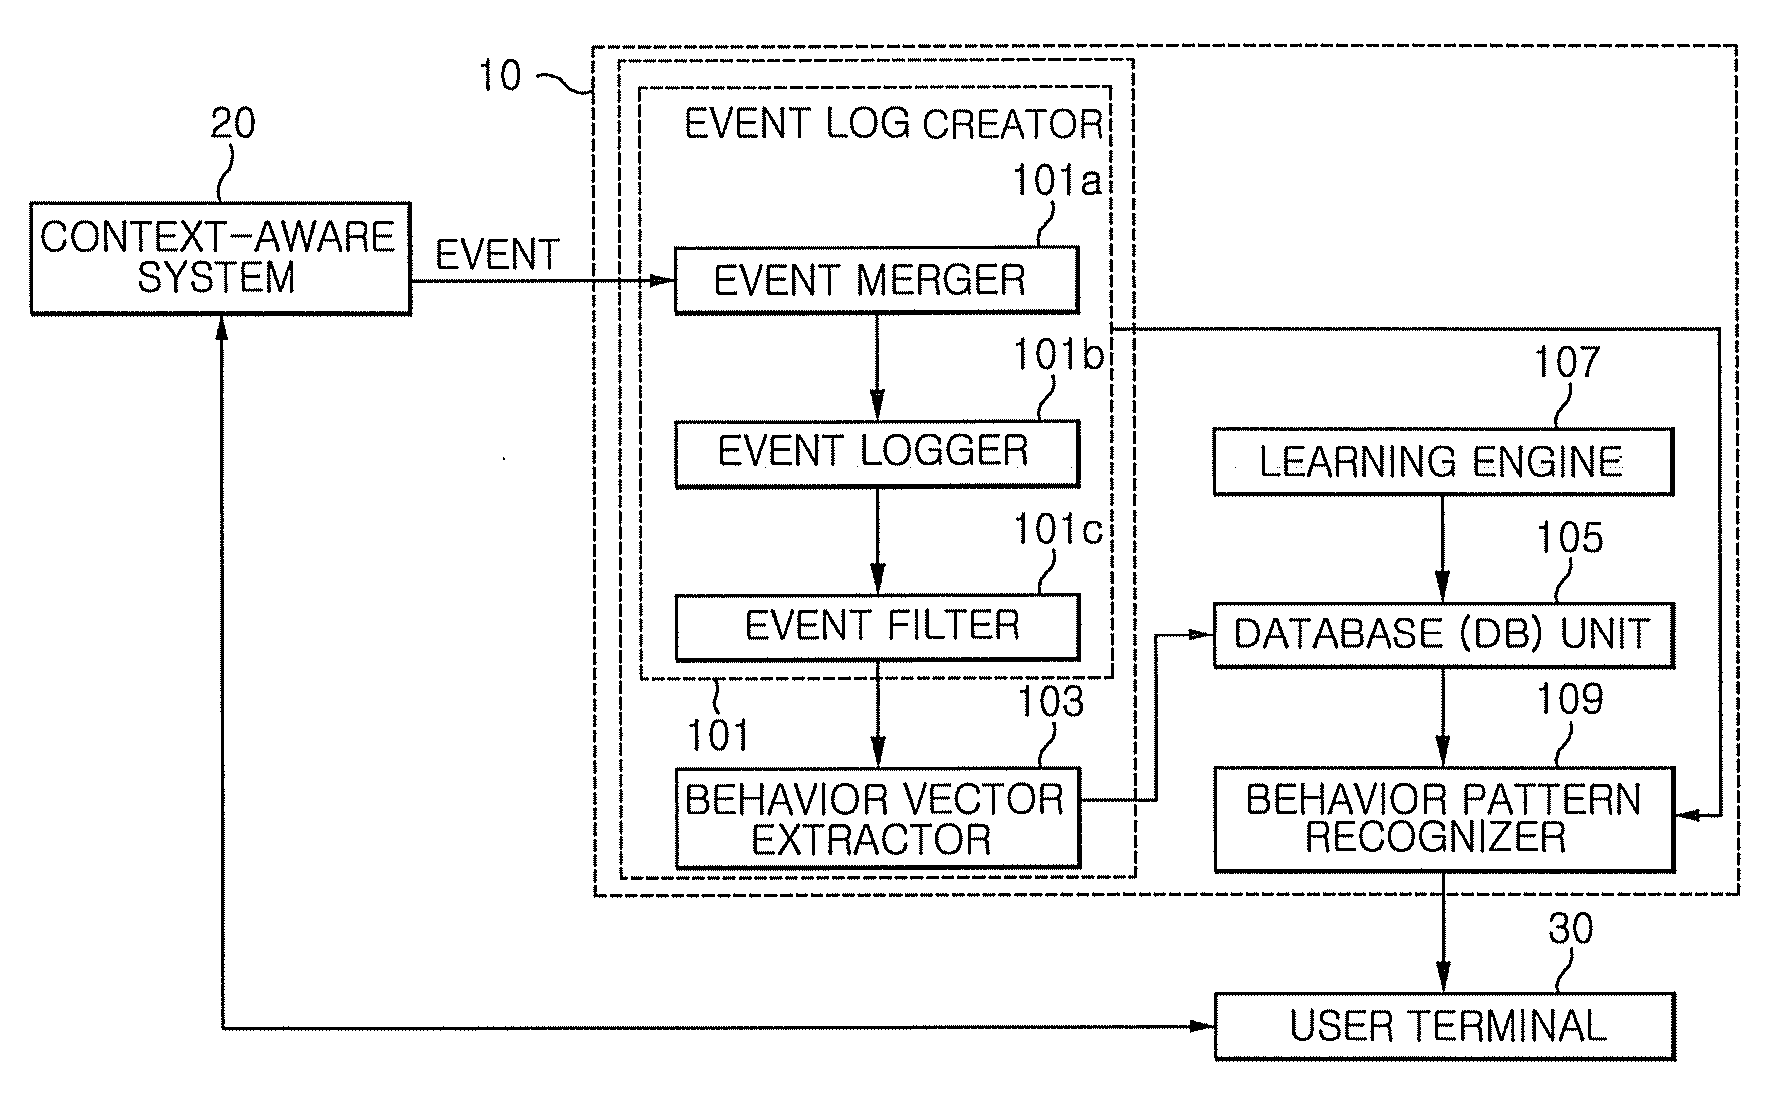 Apparatus and method of constructing user behavior pattern based on event log generated from context-aware system environment